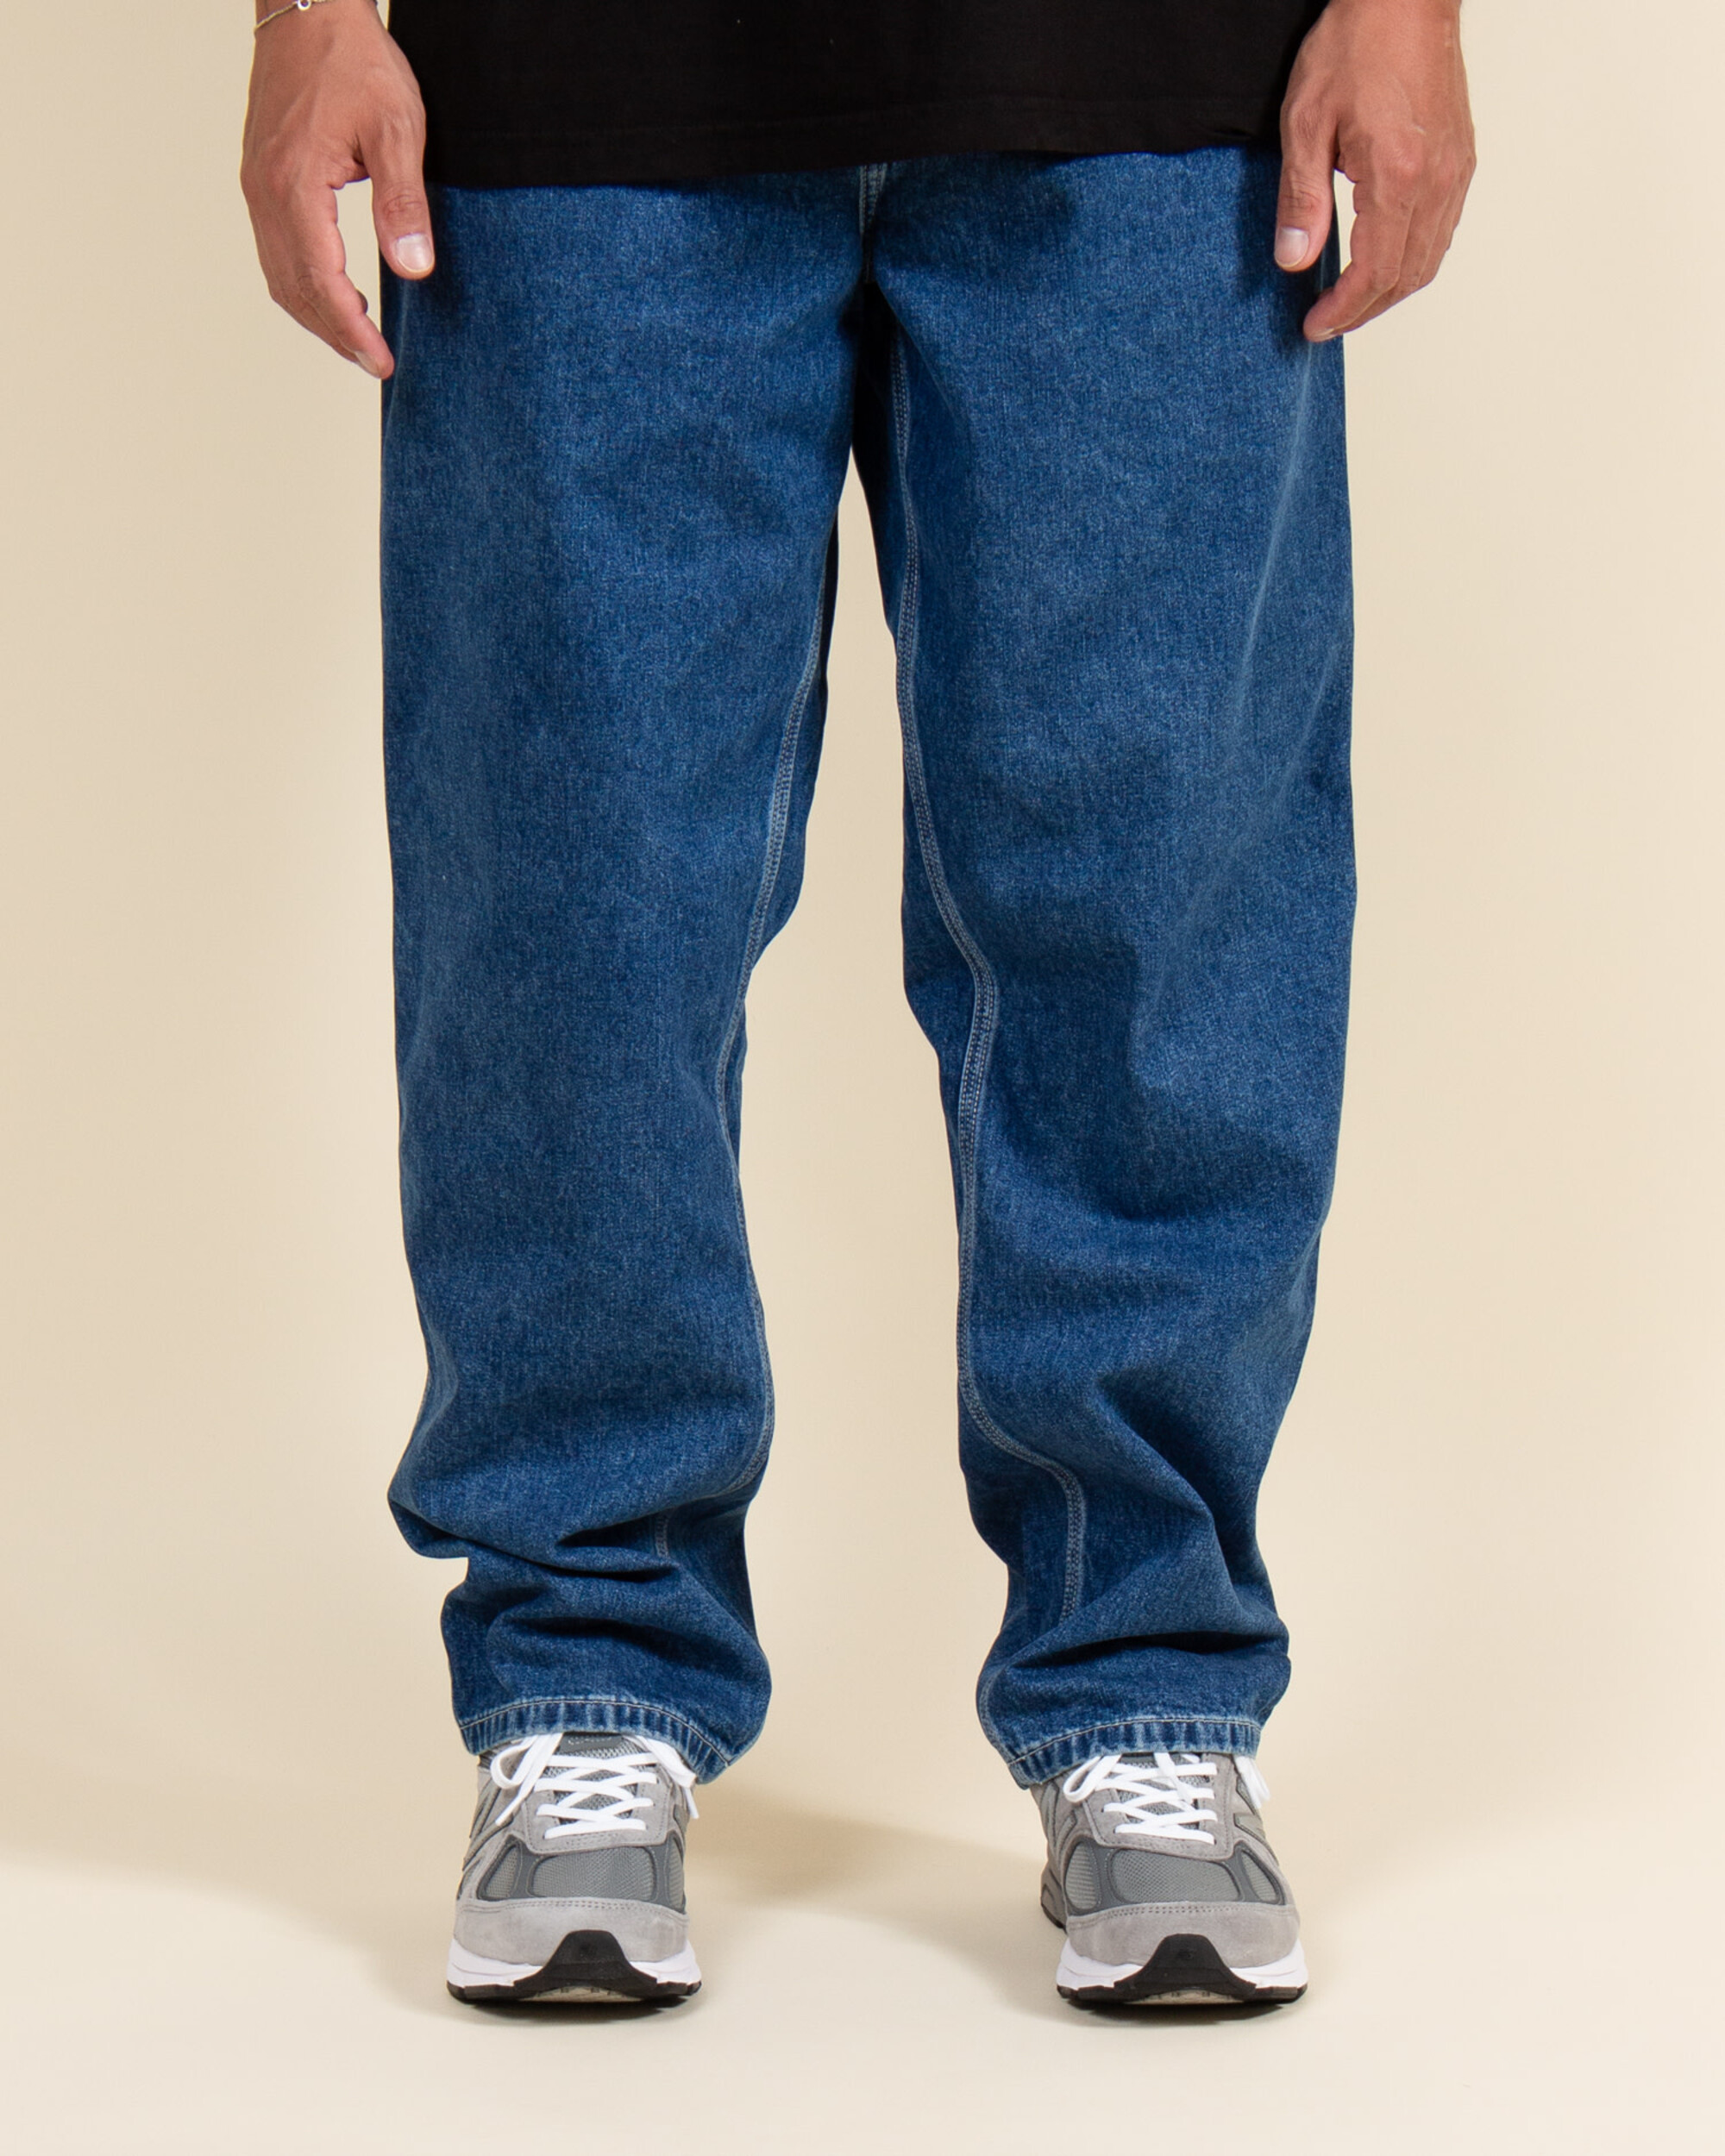 Carhartt WIP Simple Pant - Blue (stone washed)